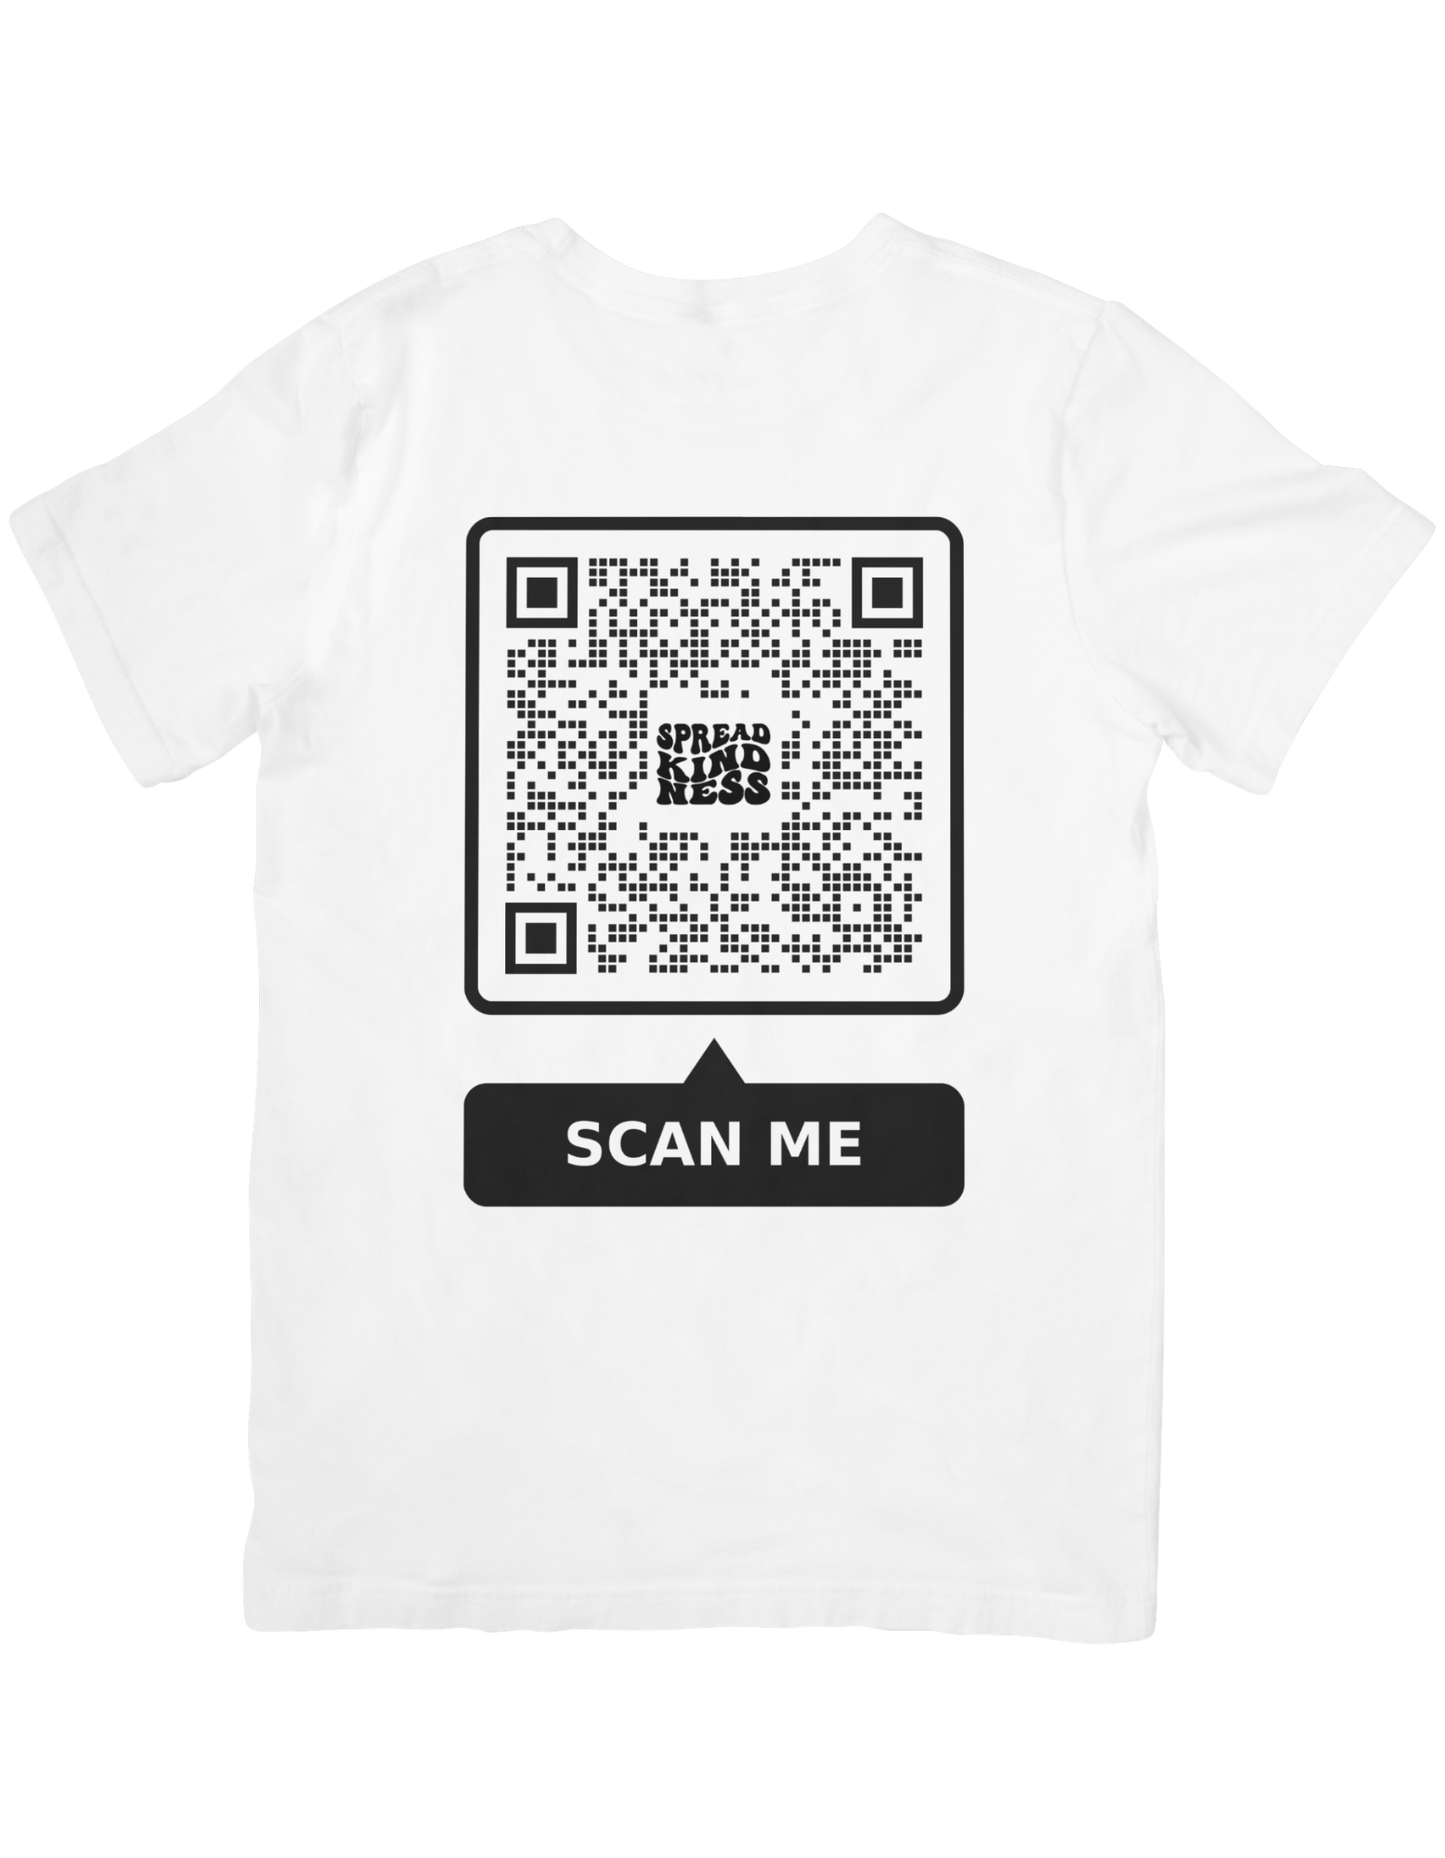 QR code T-Shirt  "Let your smile change the world, don’t let the world change your smile.”